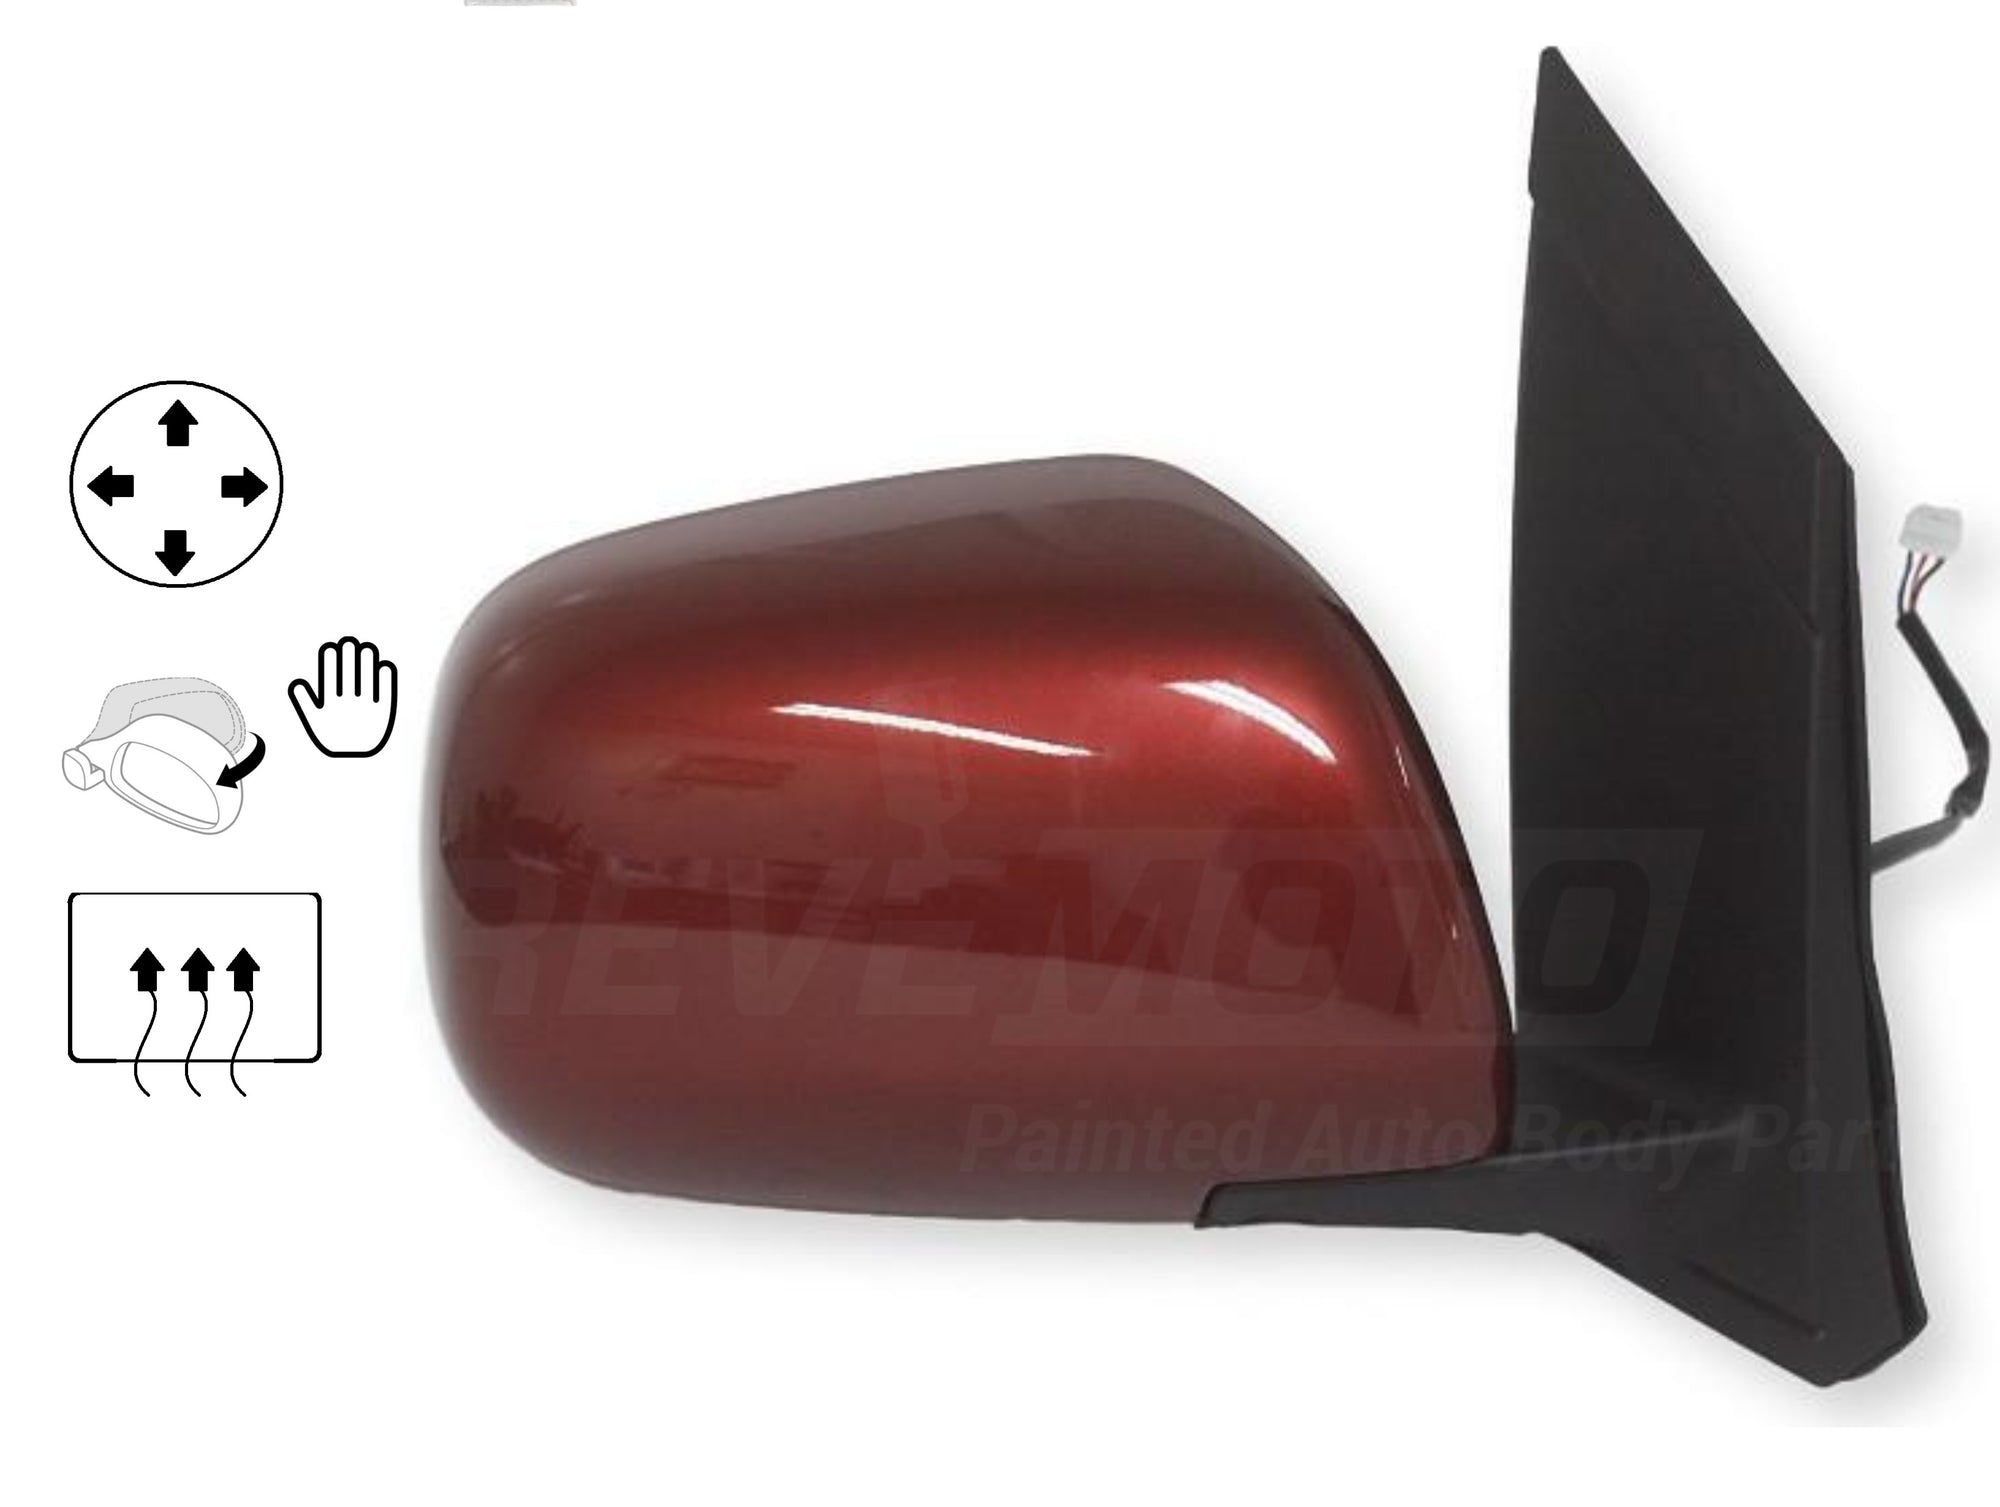 2004_Toyota_Sienna_Passenger_Side_View_Mirror_Power_Manual_Folding_Heated_wo_Auto_Dimming_Painted_Salsa_Red_Pearl_3Q3-87910AE0206